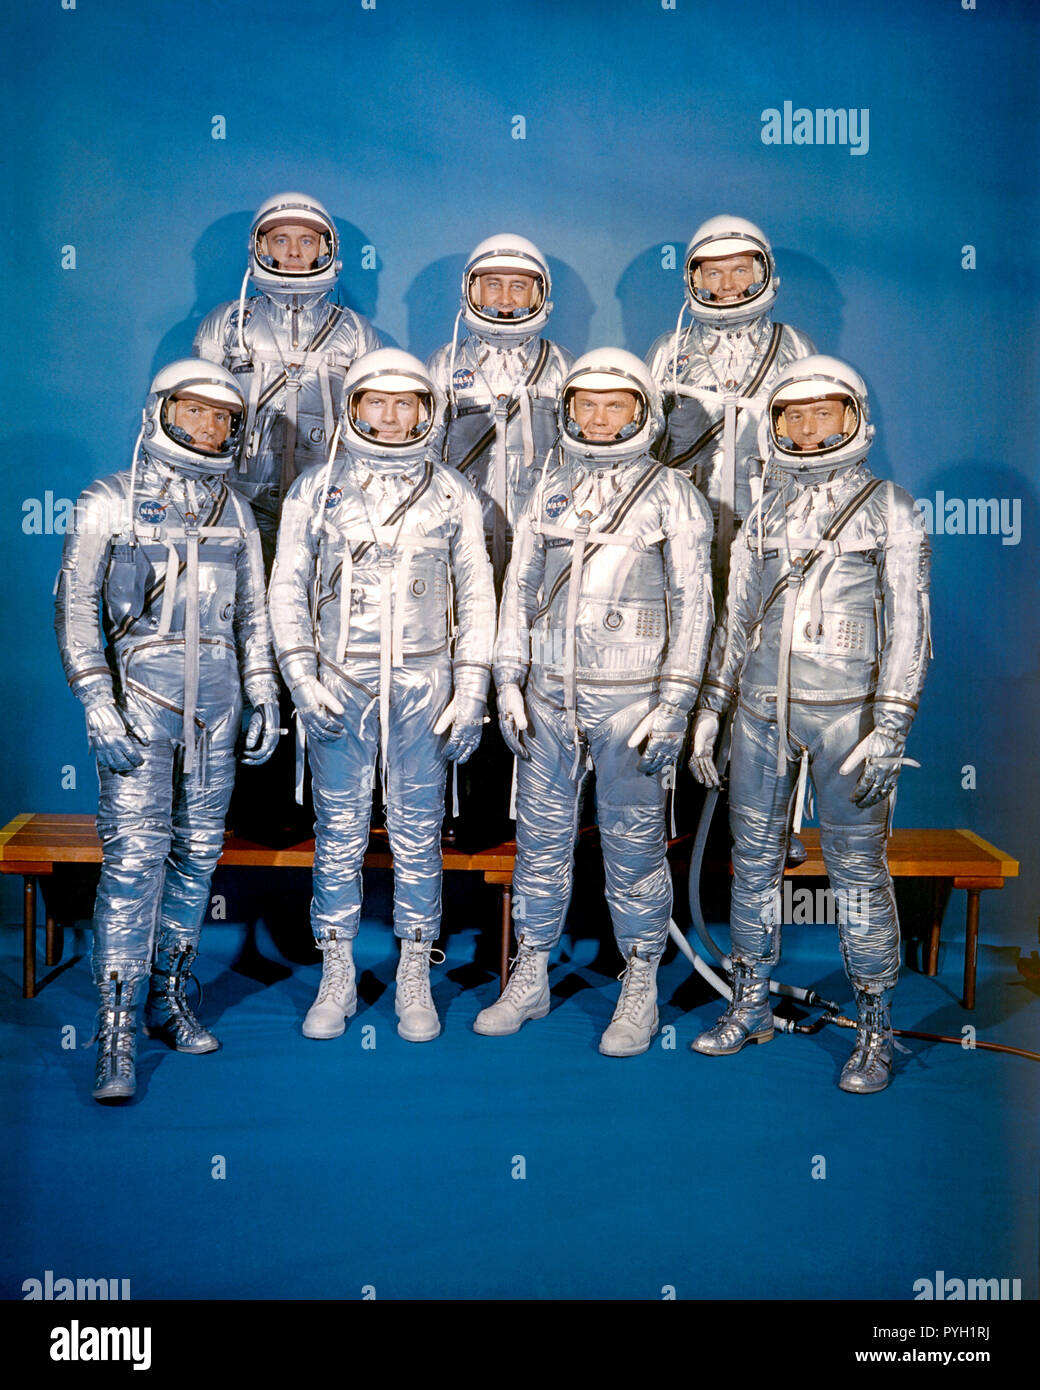 These seven men, wearing spacesuits in this portrait, composed the first group of astronauts announced by the National Aeronautics and Space Administration (NASA). They were selected in April of 1959 for the Mercury Program. Front row, left to right, are Walter M. Schirra Jr., Donald K. Slayton, John H. Glenn Jr., and M. Scott Carpenter. Back row, left to right, are Alan B. Shepard Jr., Virgil I. Grissom and L. Gordon Cooper Jr. Stock Photo